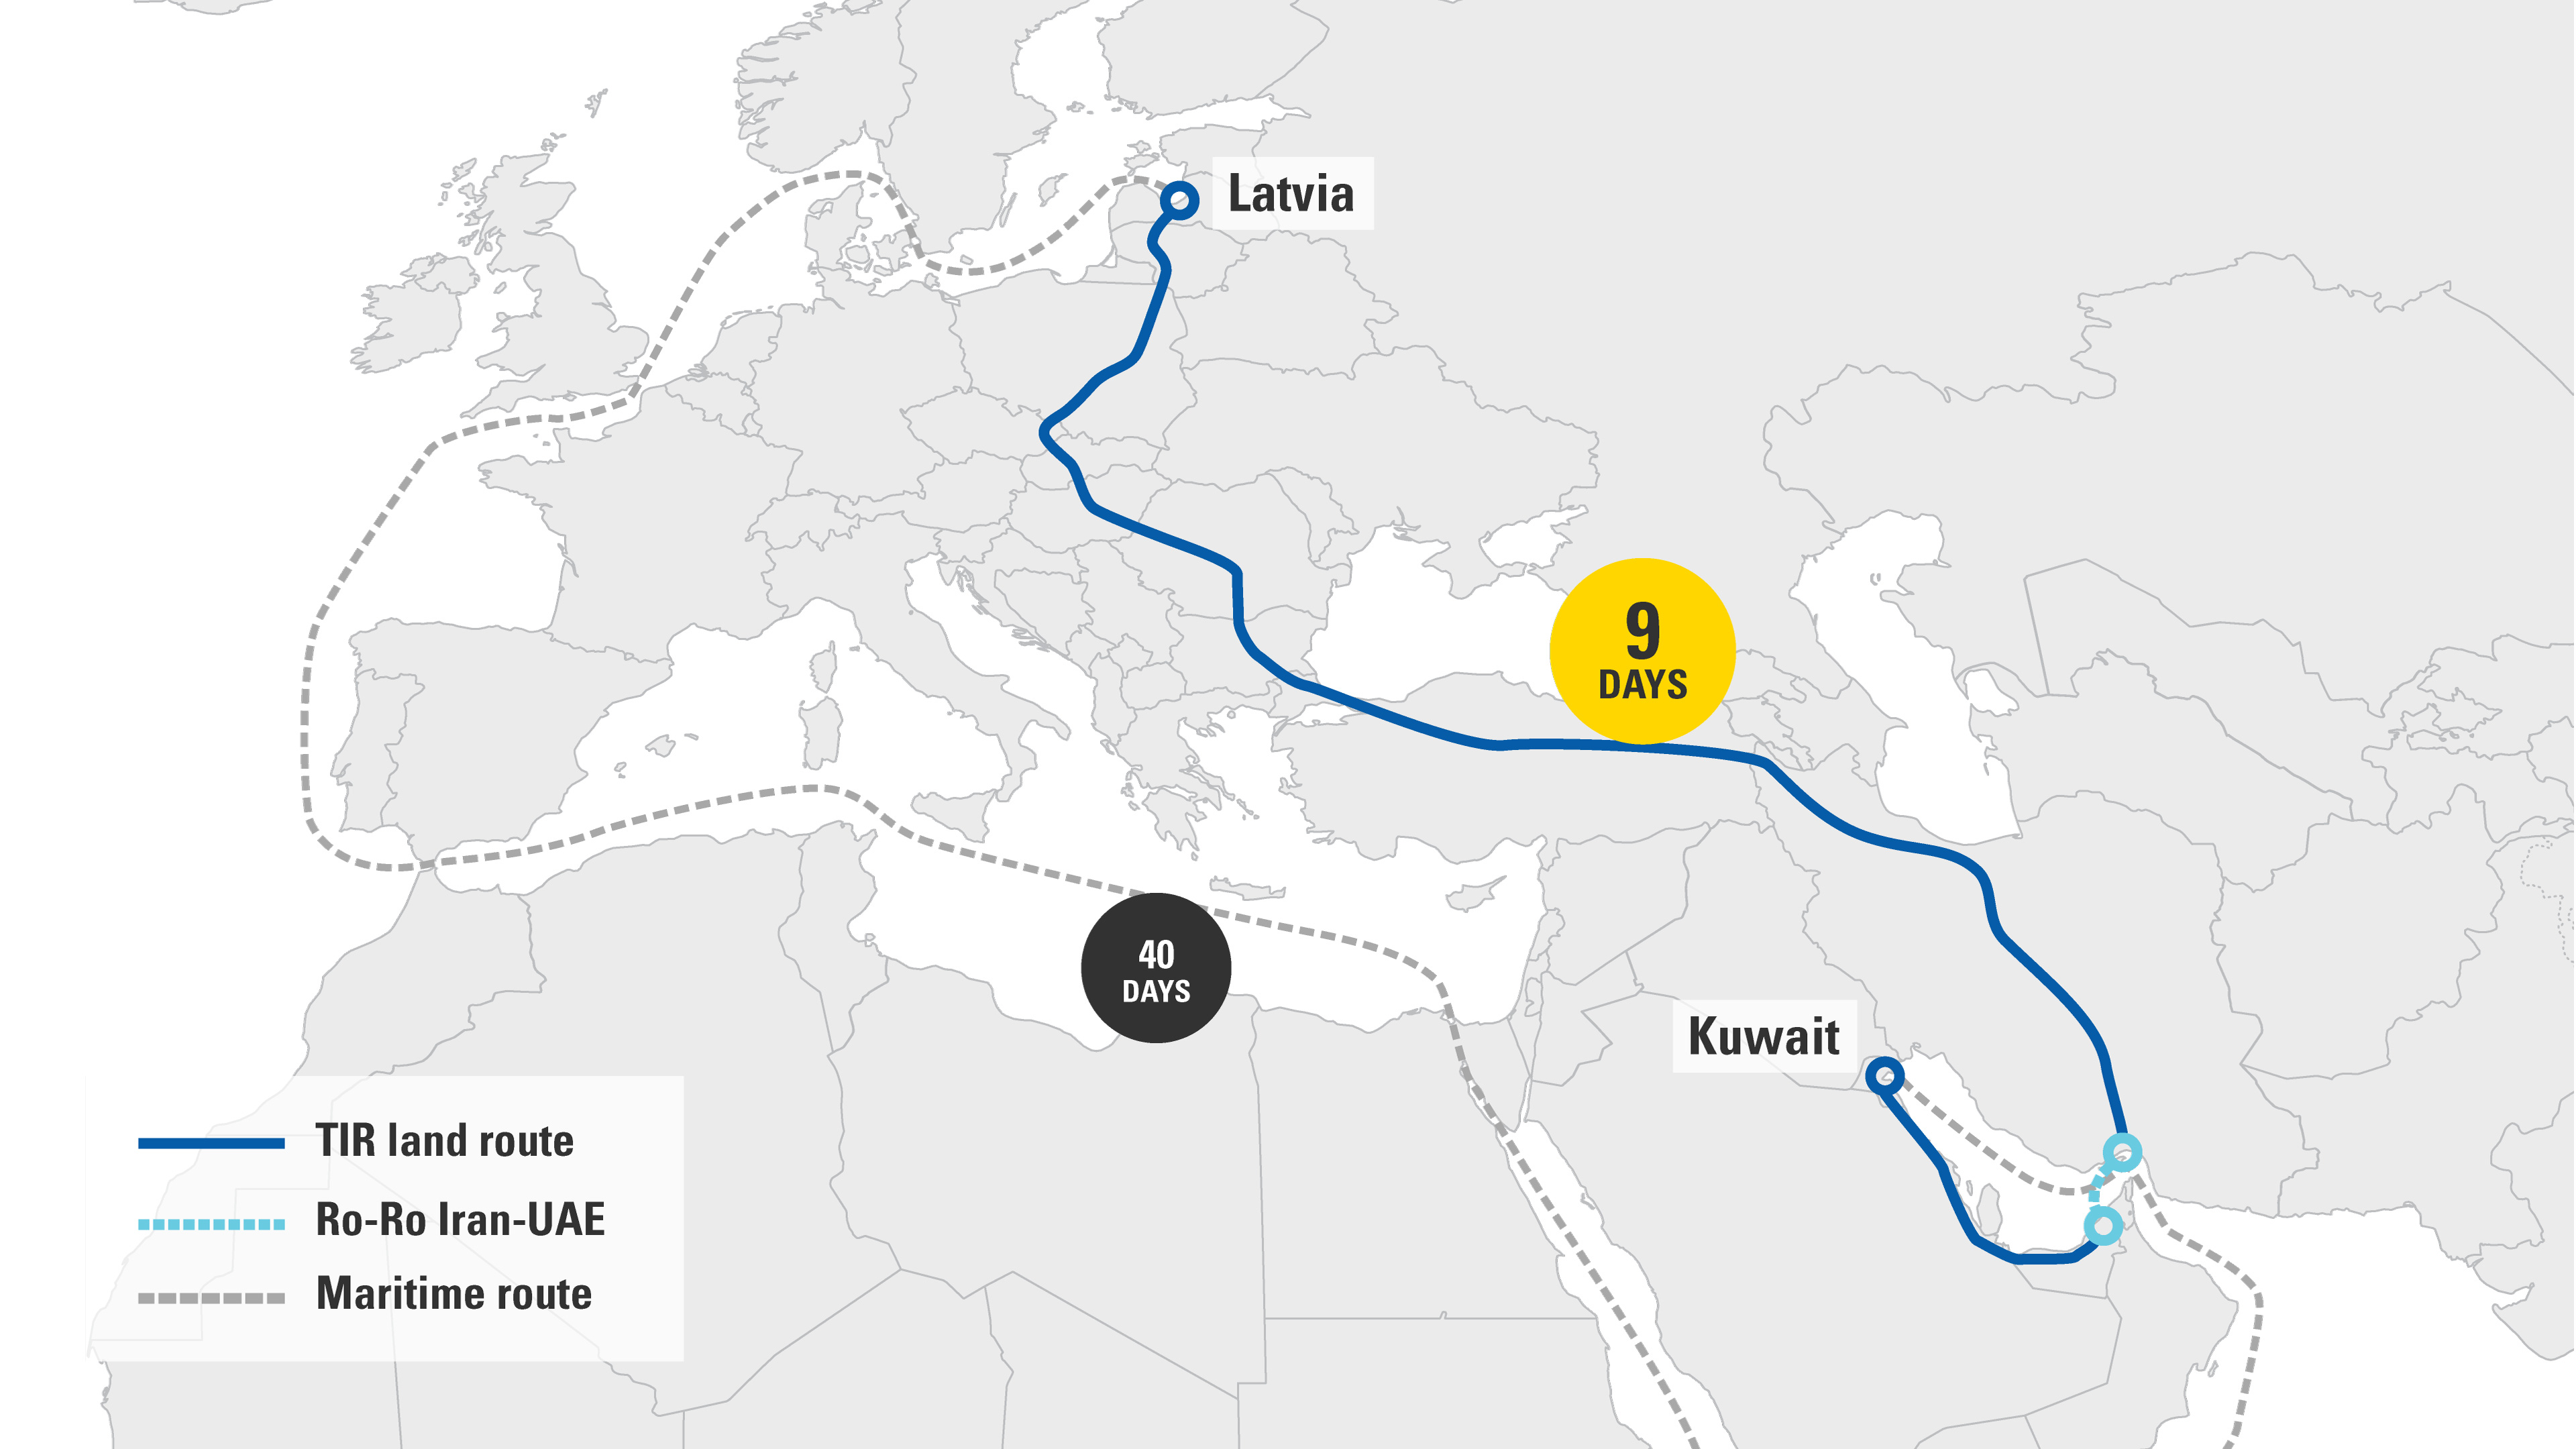 Rather than taking 40 days by sea, the Milton Group transported goods from Europe to the Middle East with TIR – crossing 13 countries – in just nine days